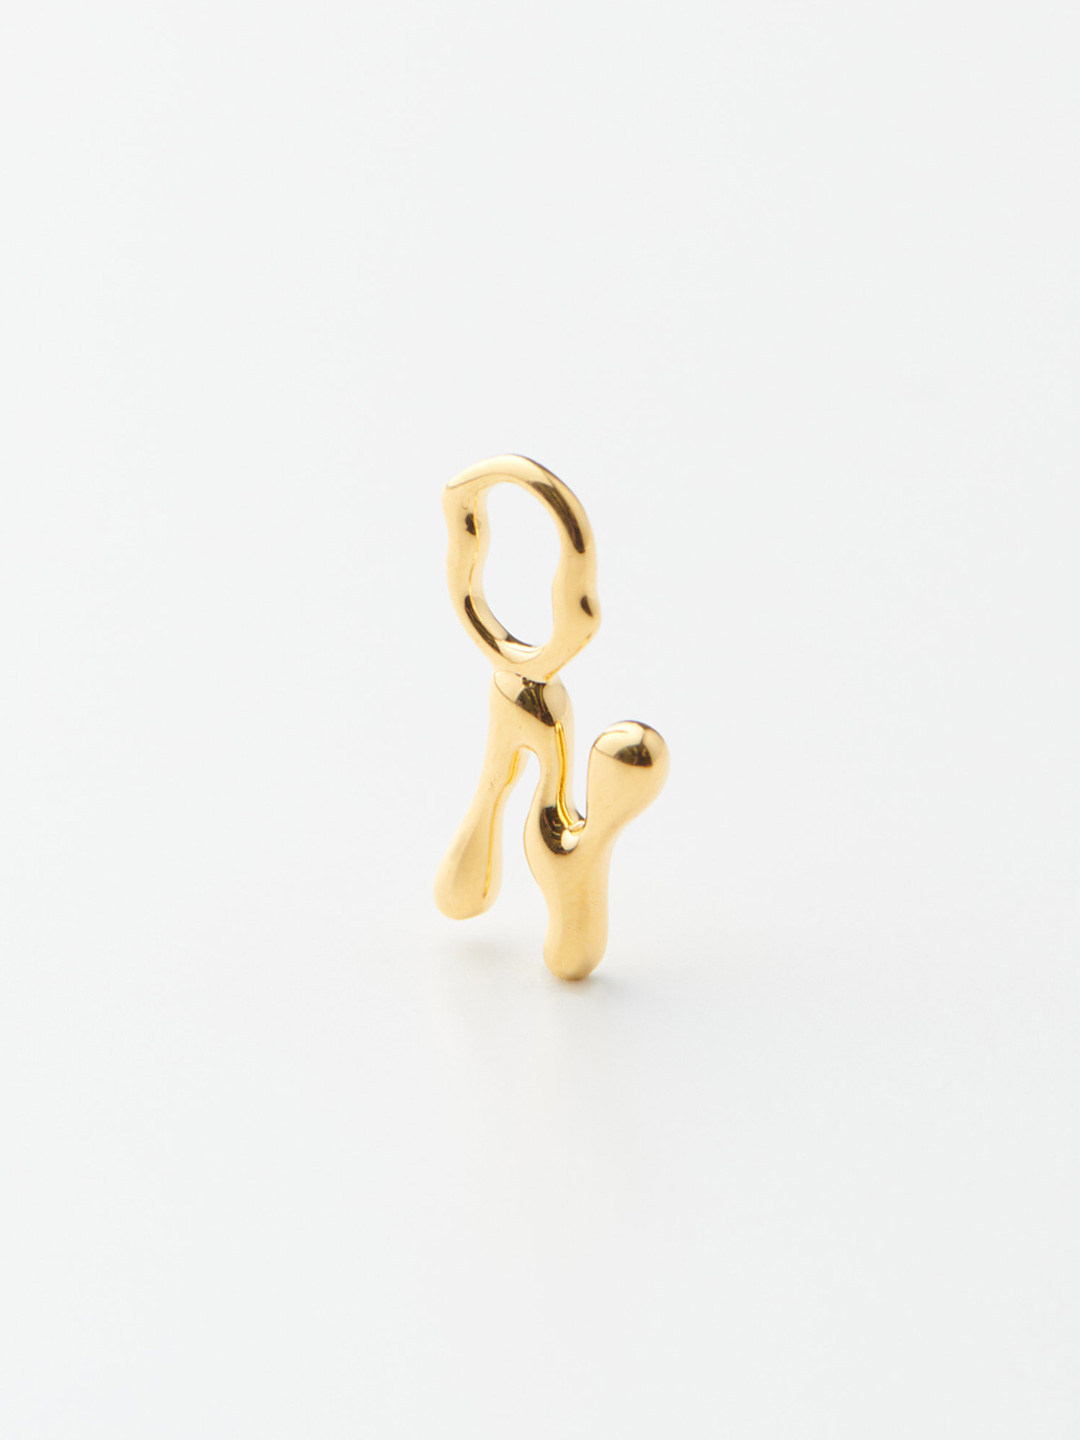 Fluent Letter N Charm - Yellow Gold